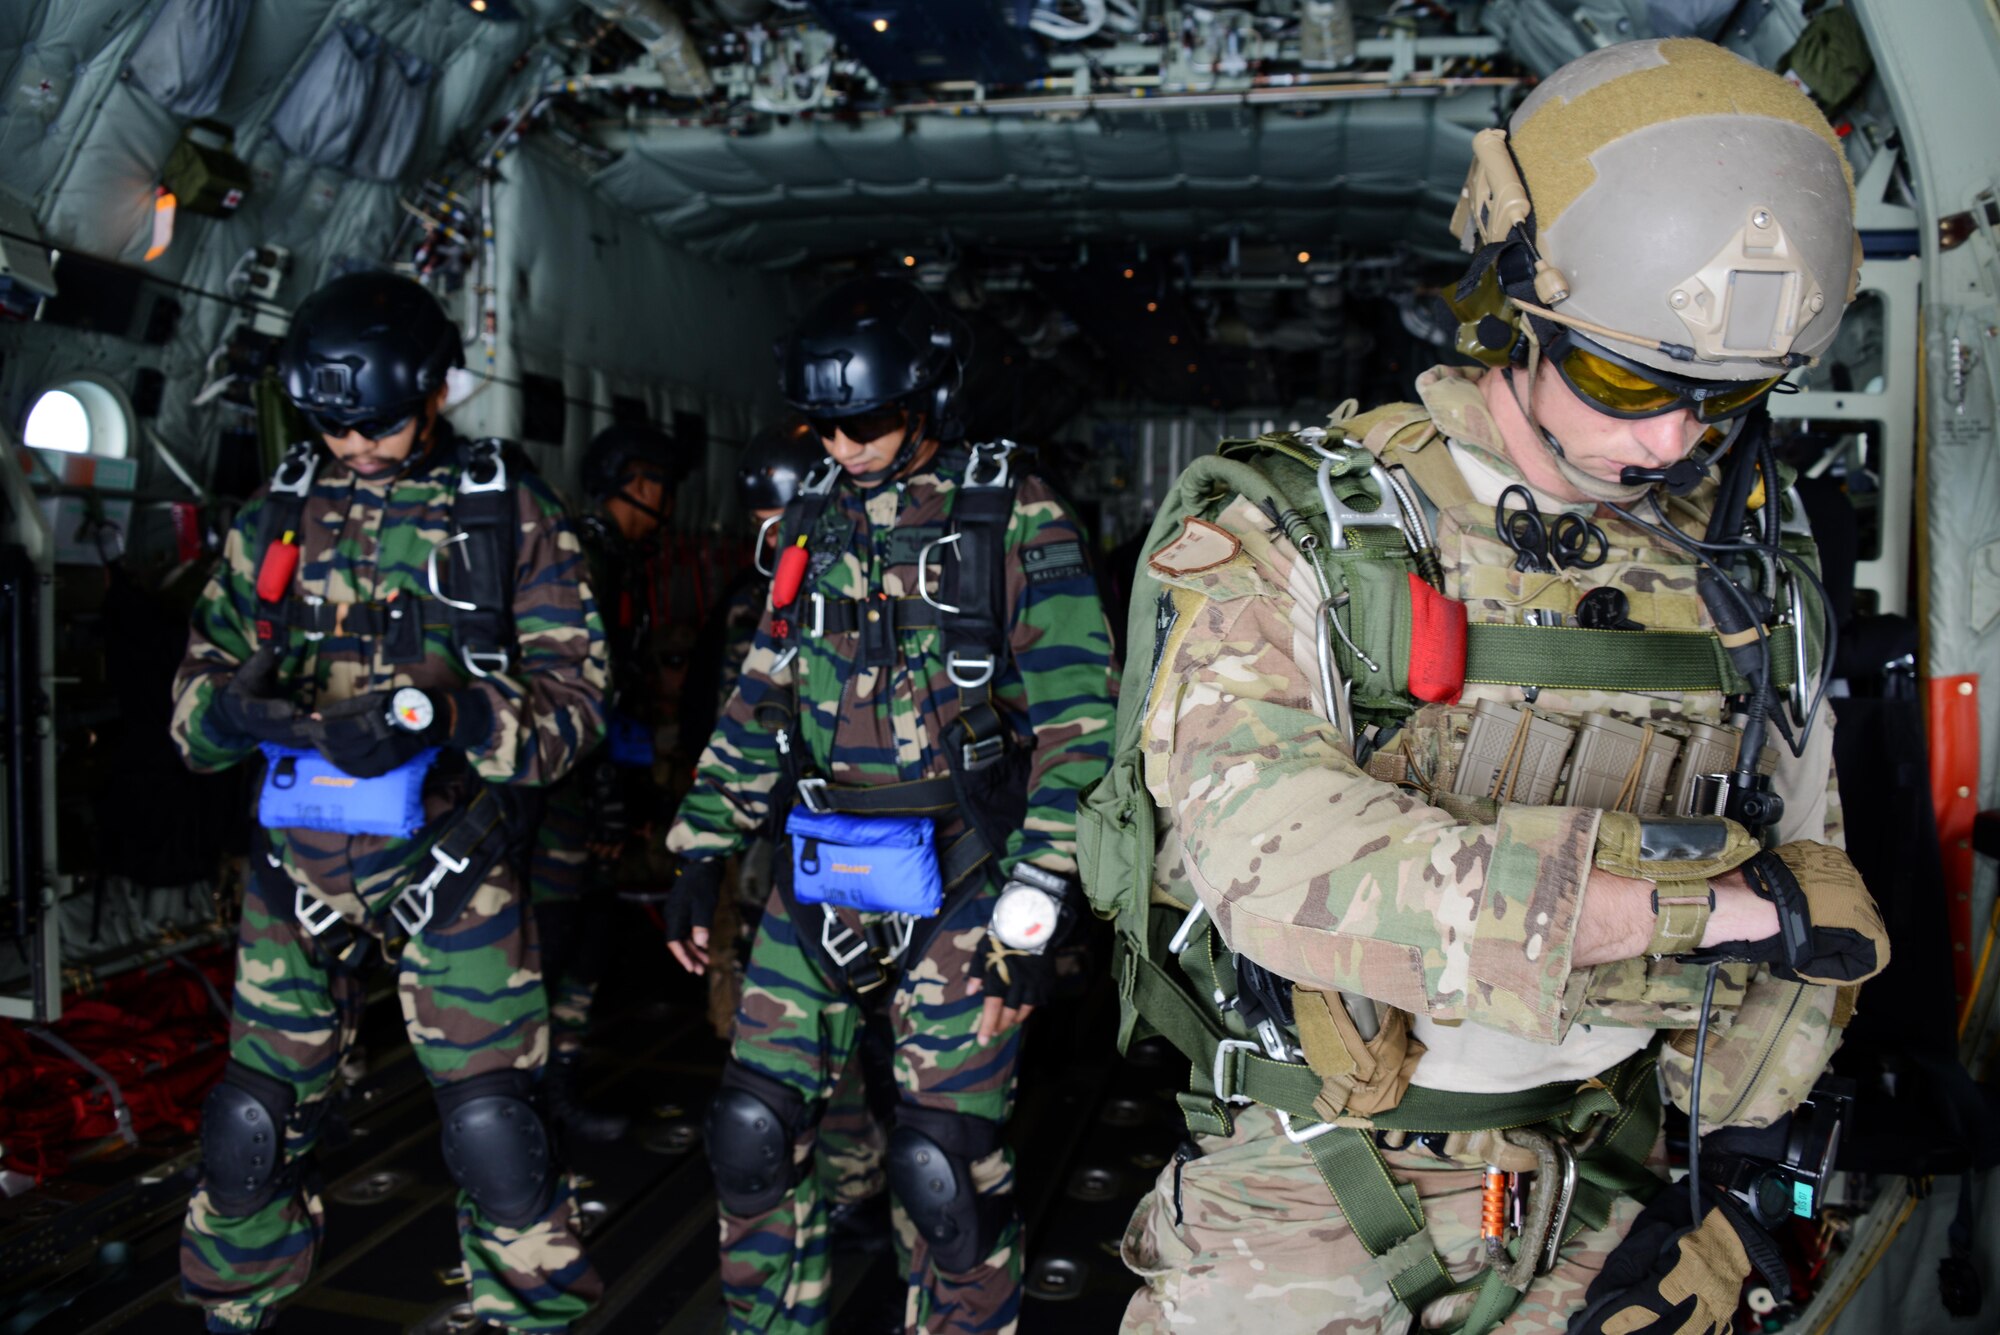 On right, a pararescueman with the 320th Special Tactics Squadron checks his altimeter as his Malaysian counterparts wait to jump out of an MC-130J Commando II from the 17th Special Operations Squadron near Kuantan, Malaysia, June 8, 2015.  The High-Altitude Low-Opening jumps were conducted as part of Exercise Teak Mint, a multinational and bilateral exercise between the Royal Malaysian Air Force and the U.S. Air Force.  (U.S. Air Force photo by Tech. Sgt. Kristine Dreyer)  